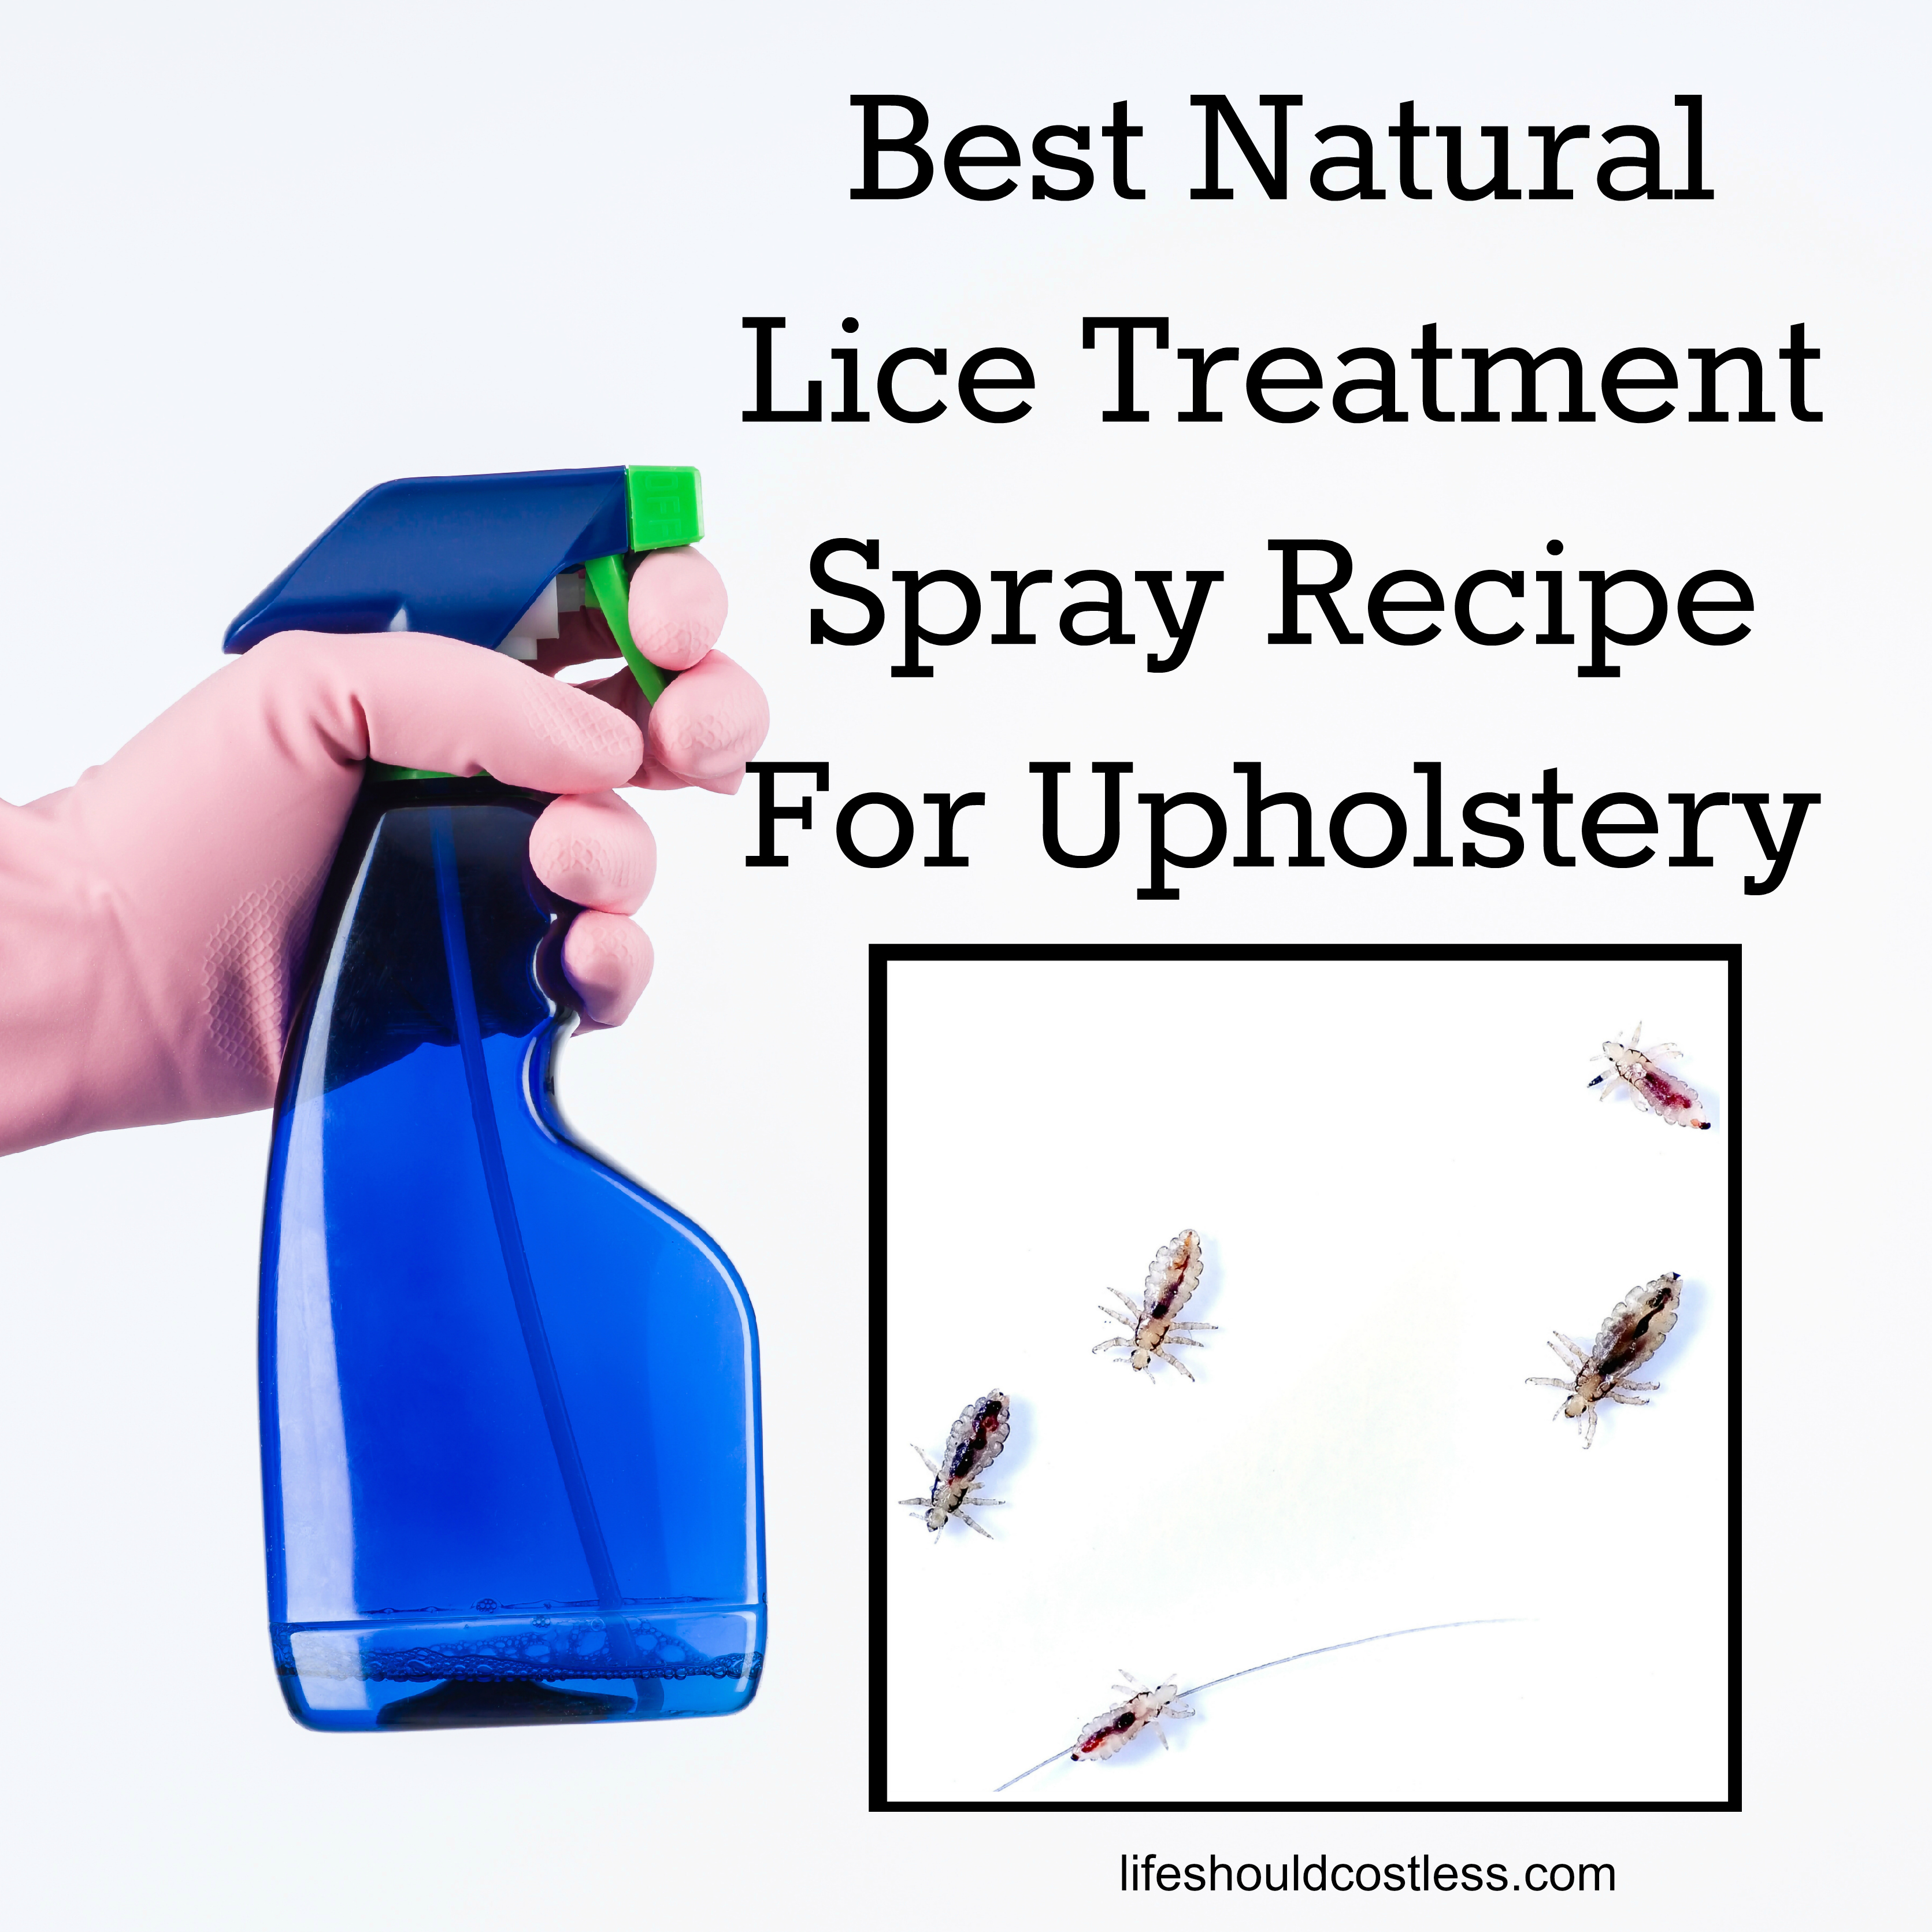 Best Head Lice Treatment Spray Recipe For Upholstery (couches, beds, carpet, plush toys